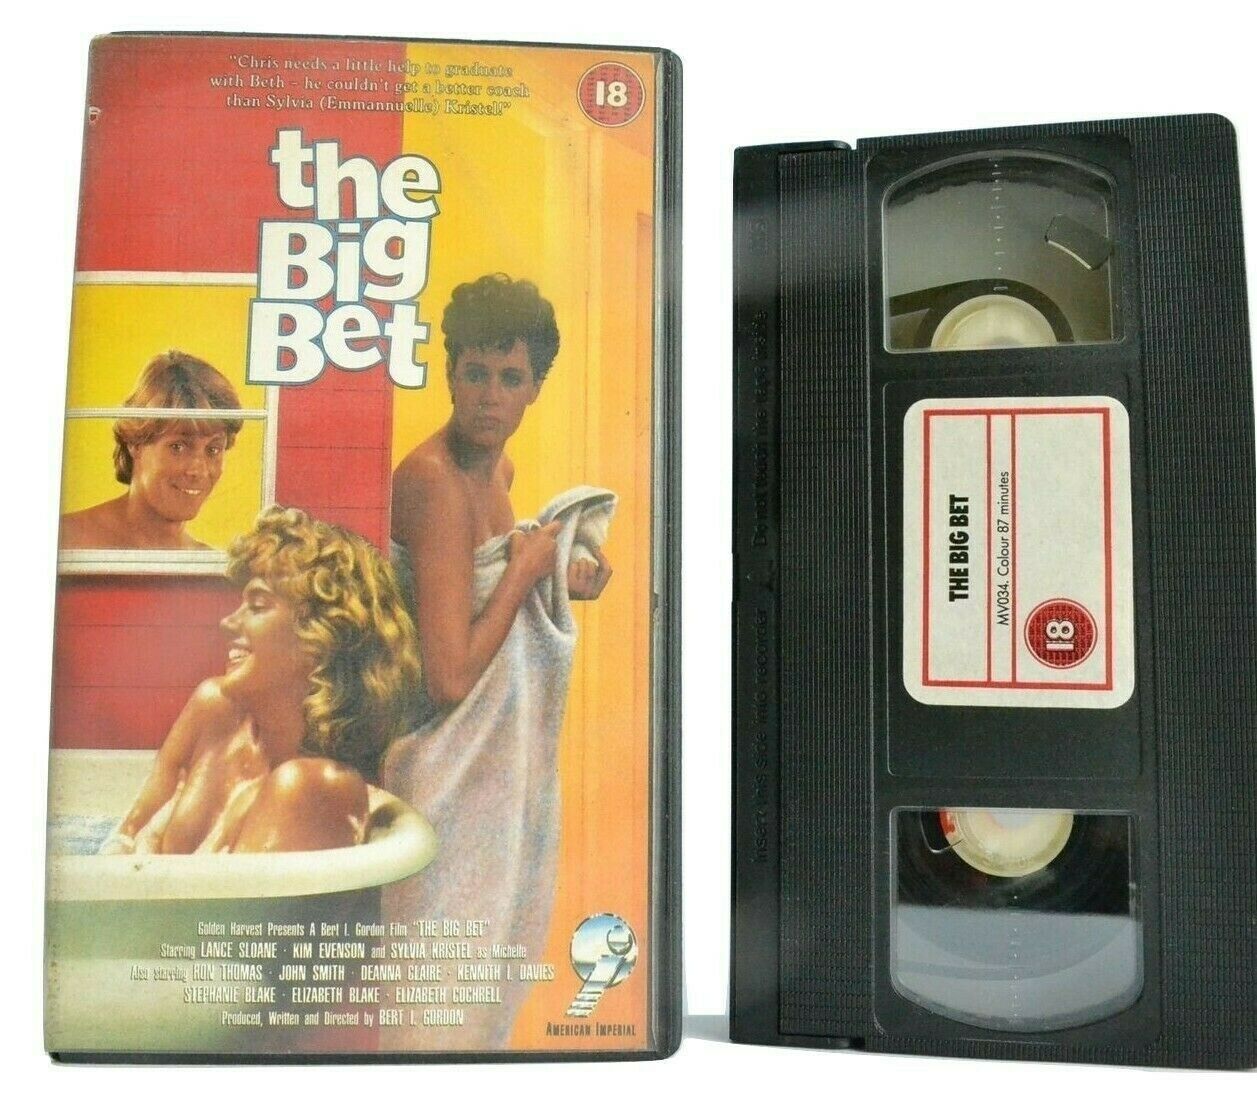 The Big Bet (1985); [American Imperial] Romantic Comedy - Sylvia Kristel - VHS-